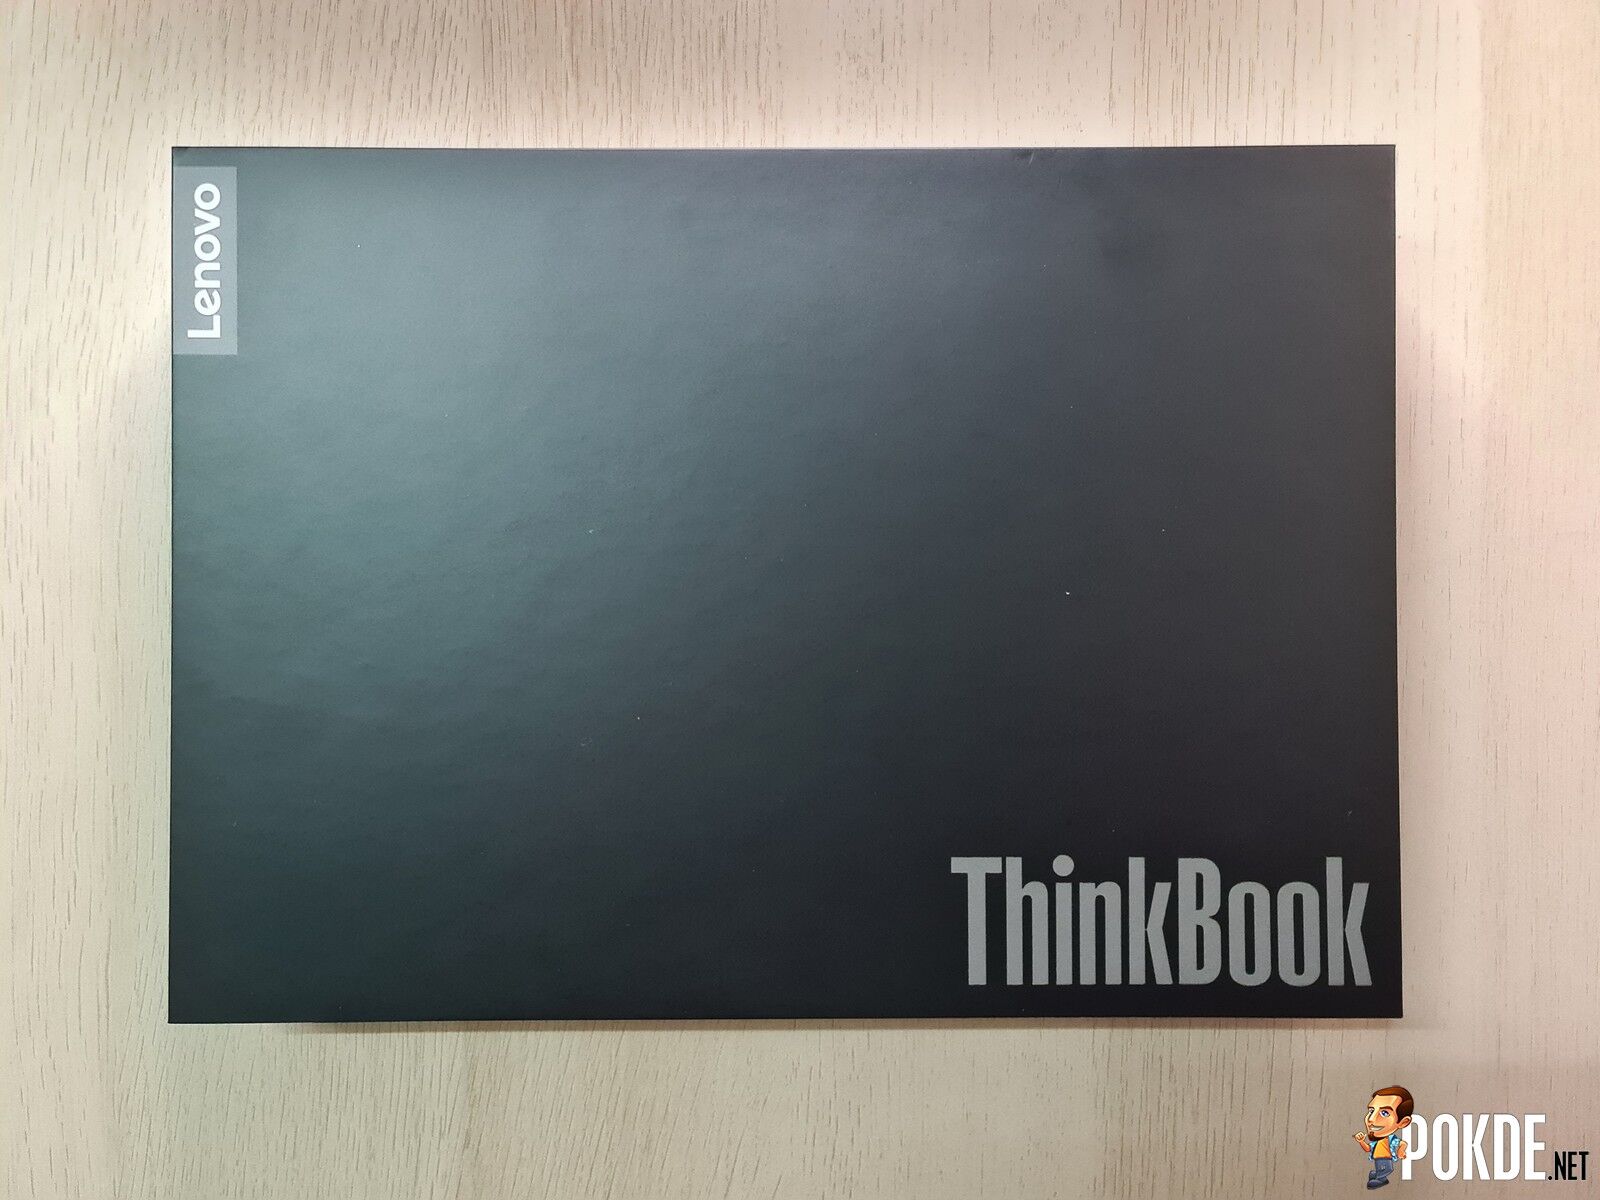 Lenovo ThinkBook Plus Review - Innovation For A Better Tomorrow 29